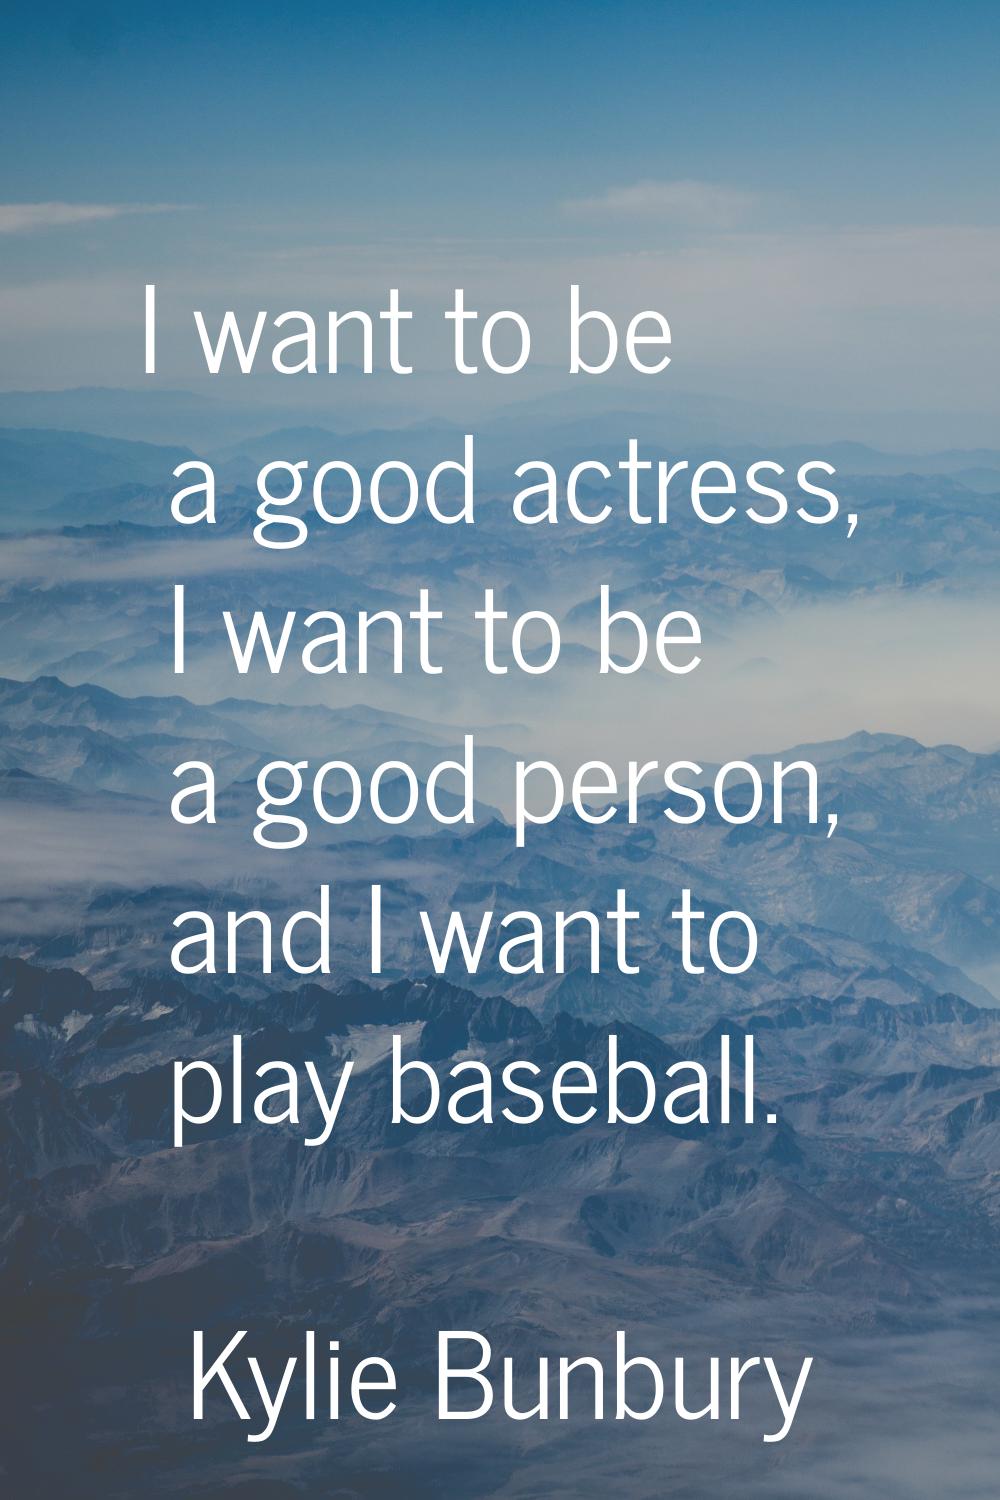 I want to be a good actress, I want to be a good person, and I want to play baseball.